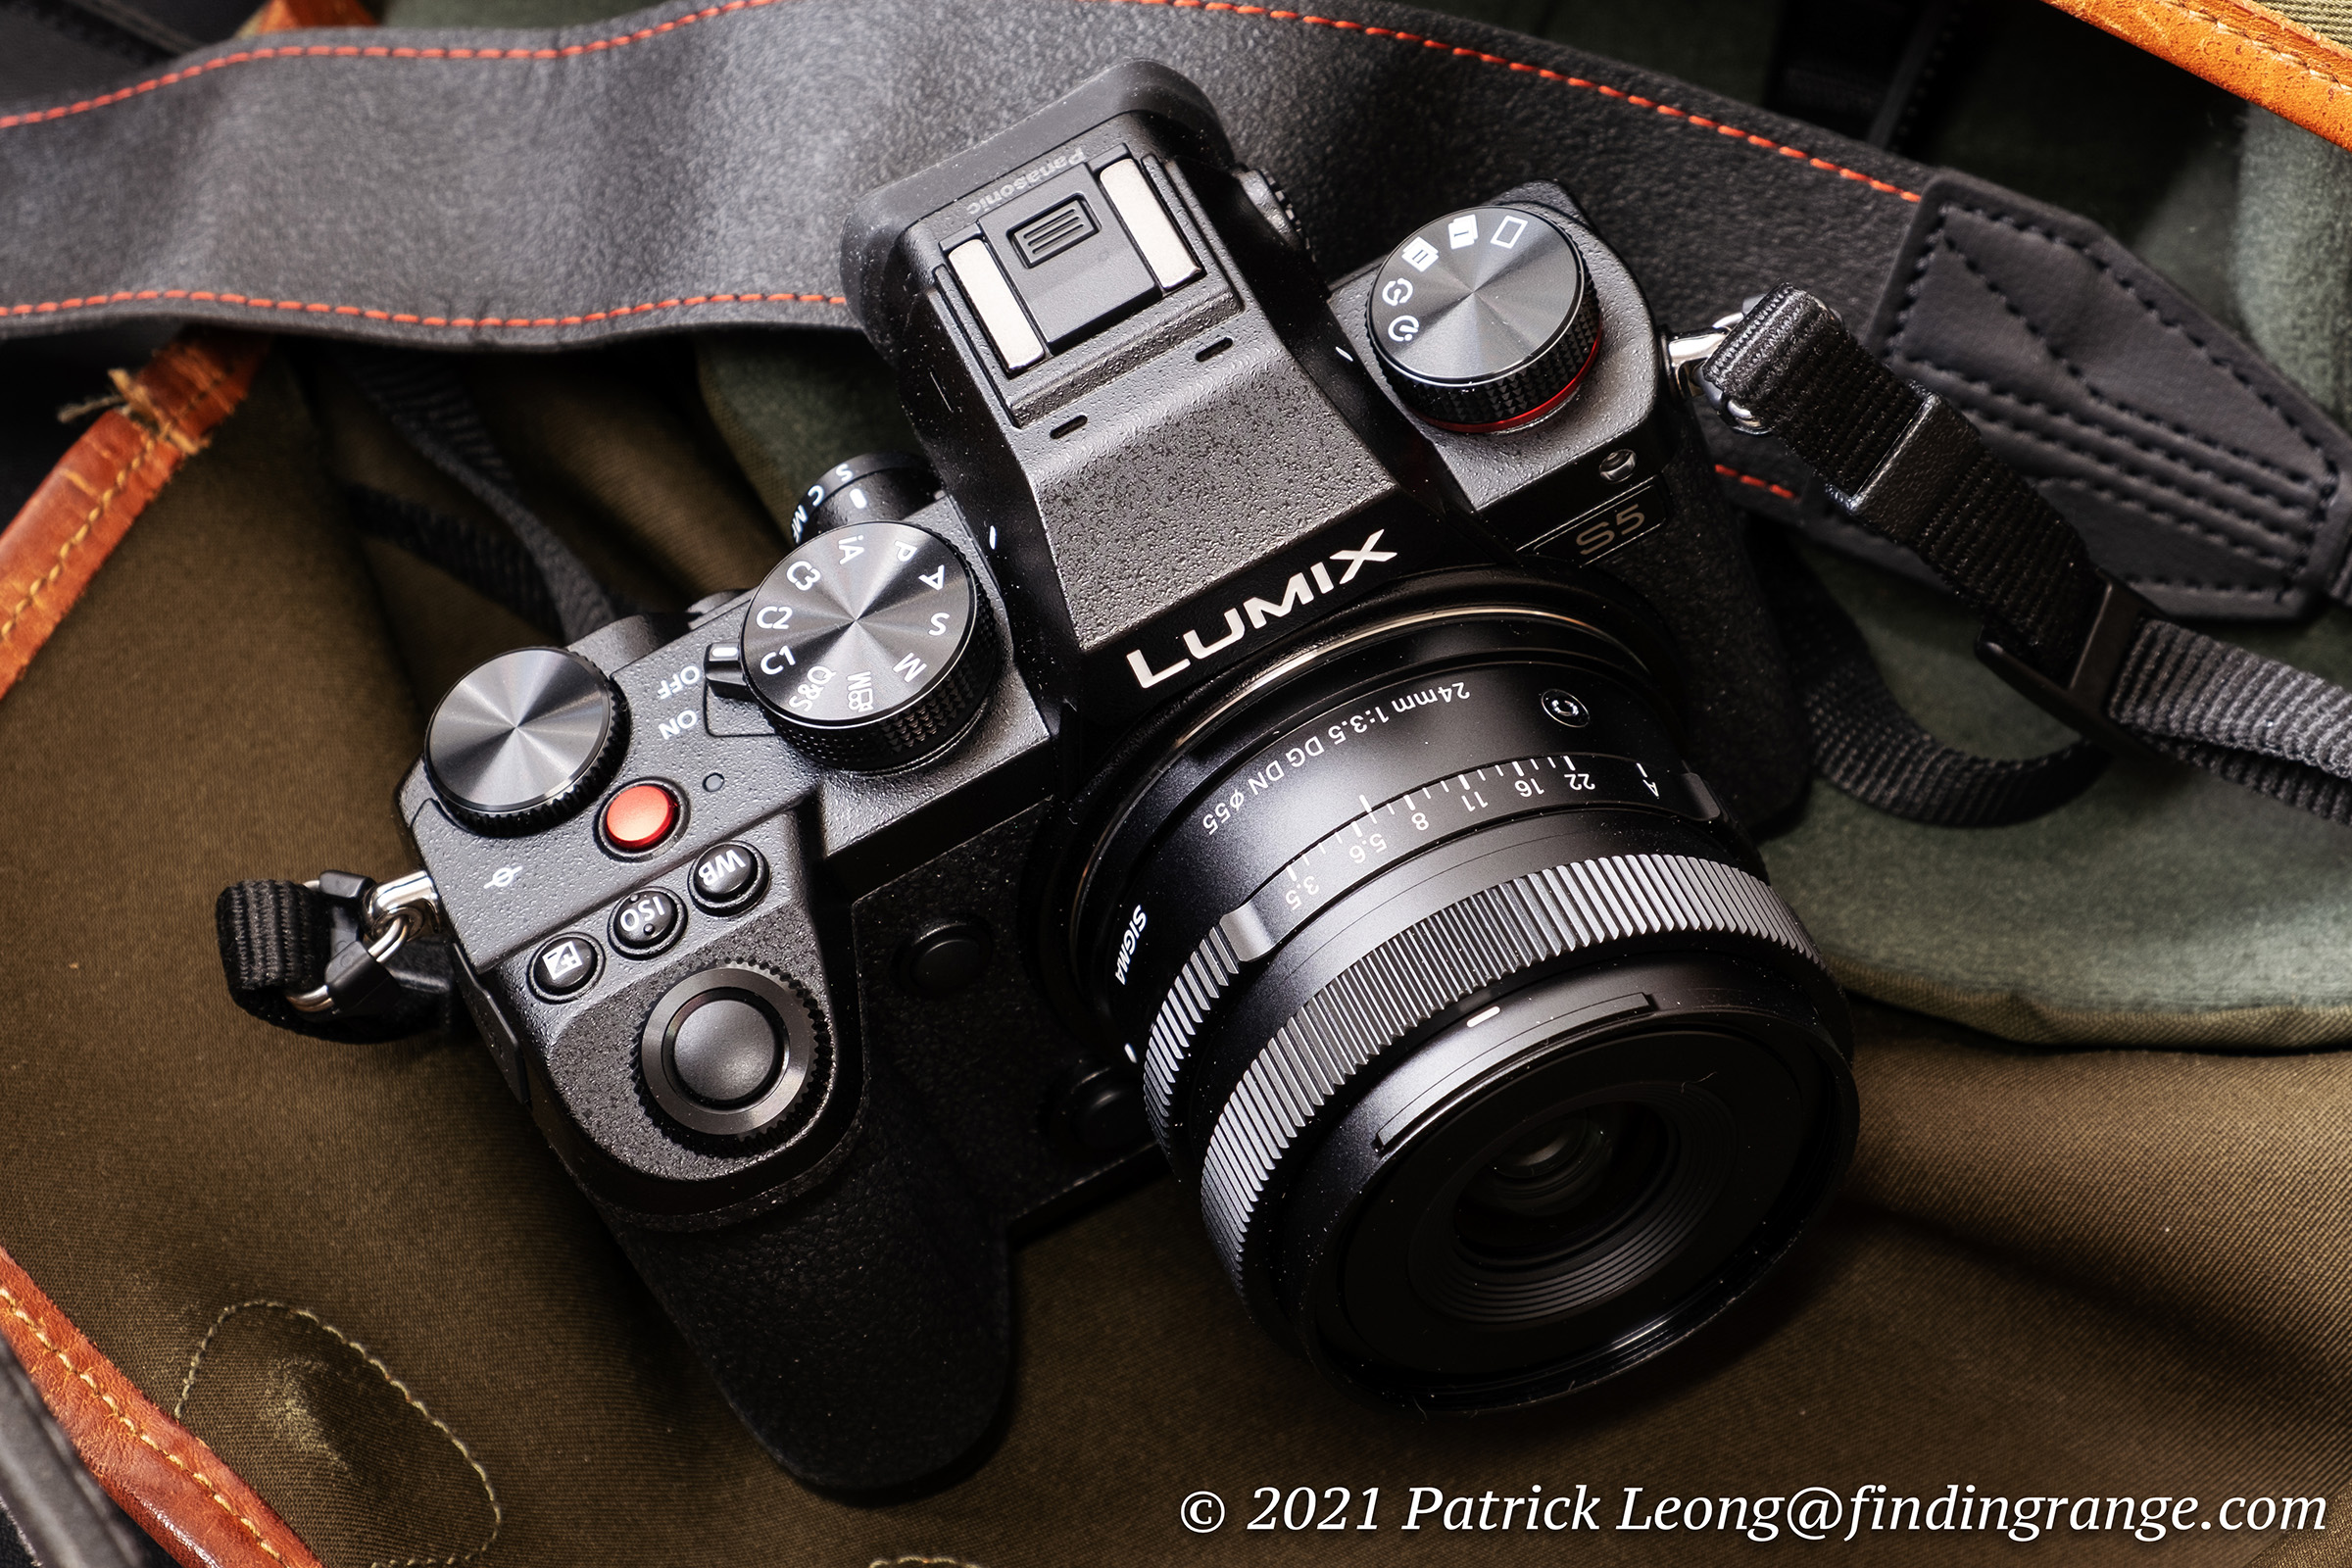 Panasonic Lumix S5: A Look Back at One of My Favorites - Finding Range